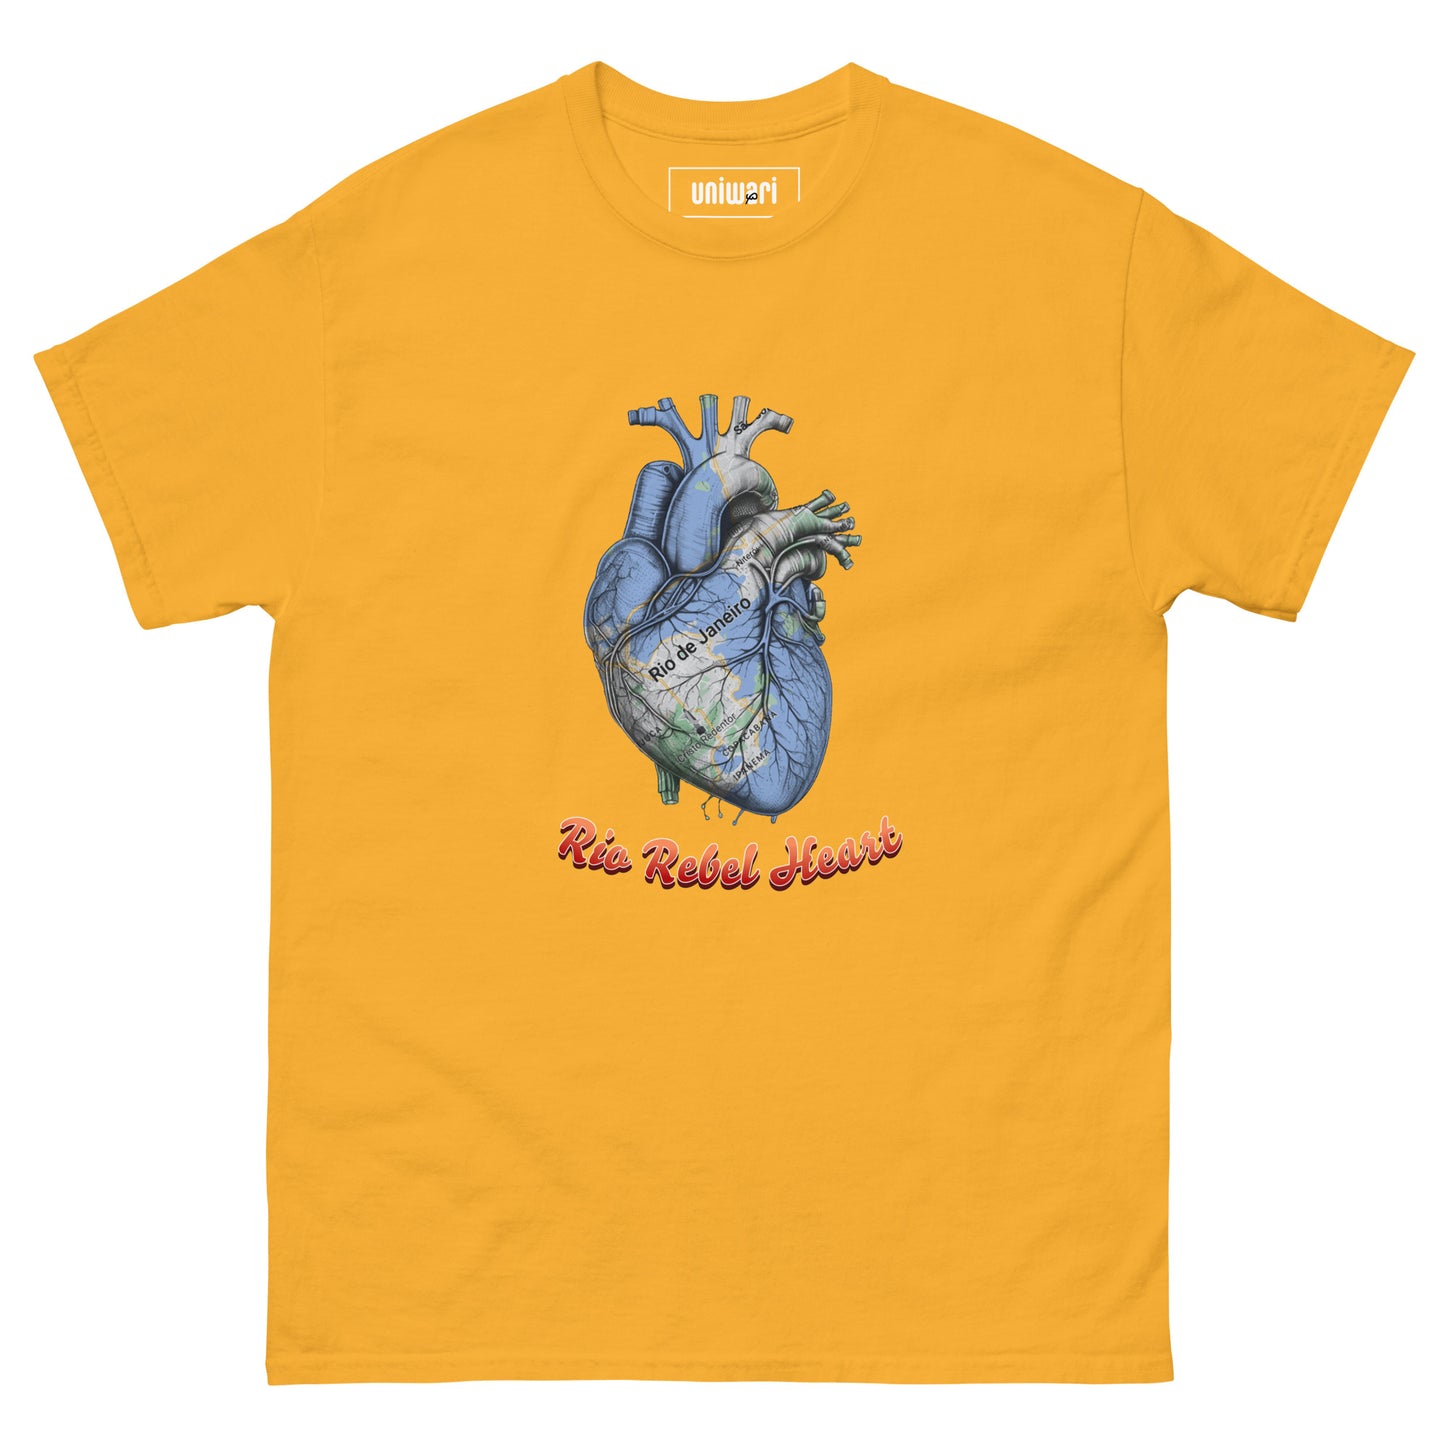 Yellow High Quality Tee - Front Design with a Heart Shaped Map of Rio de Janeiro and a Phrase "Rio Rebel Heart" print